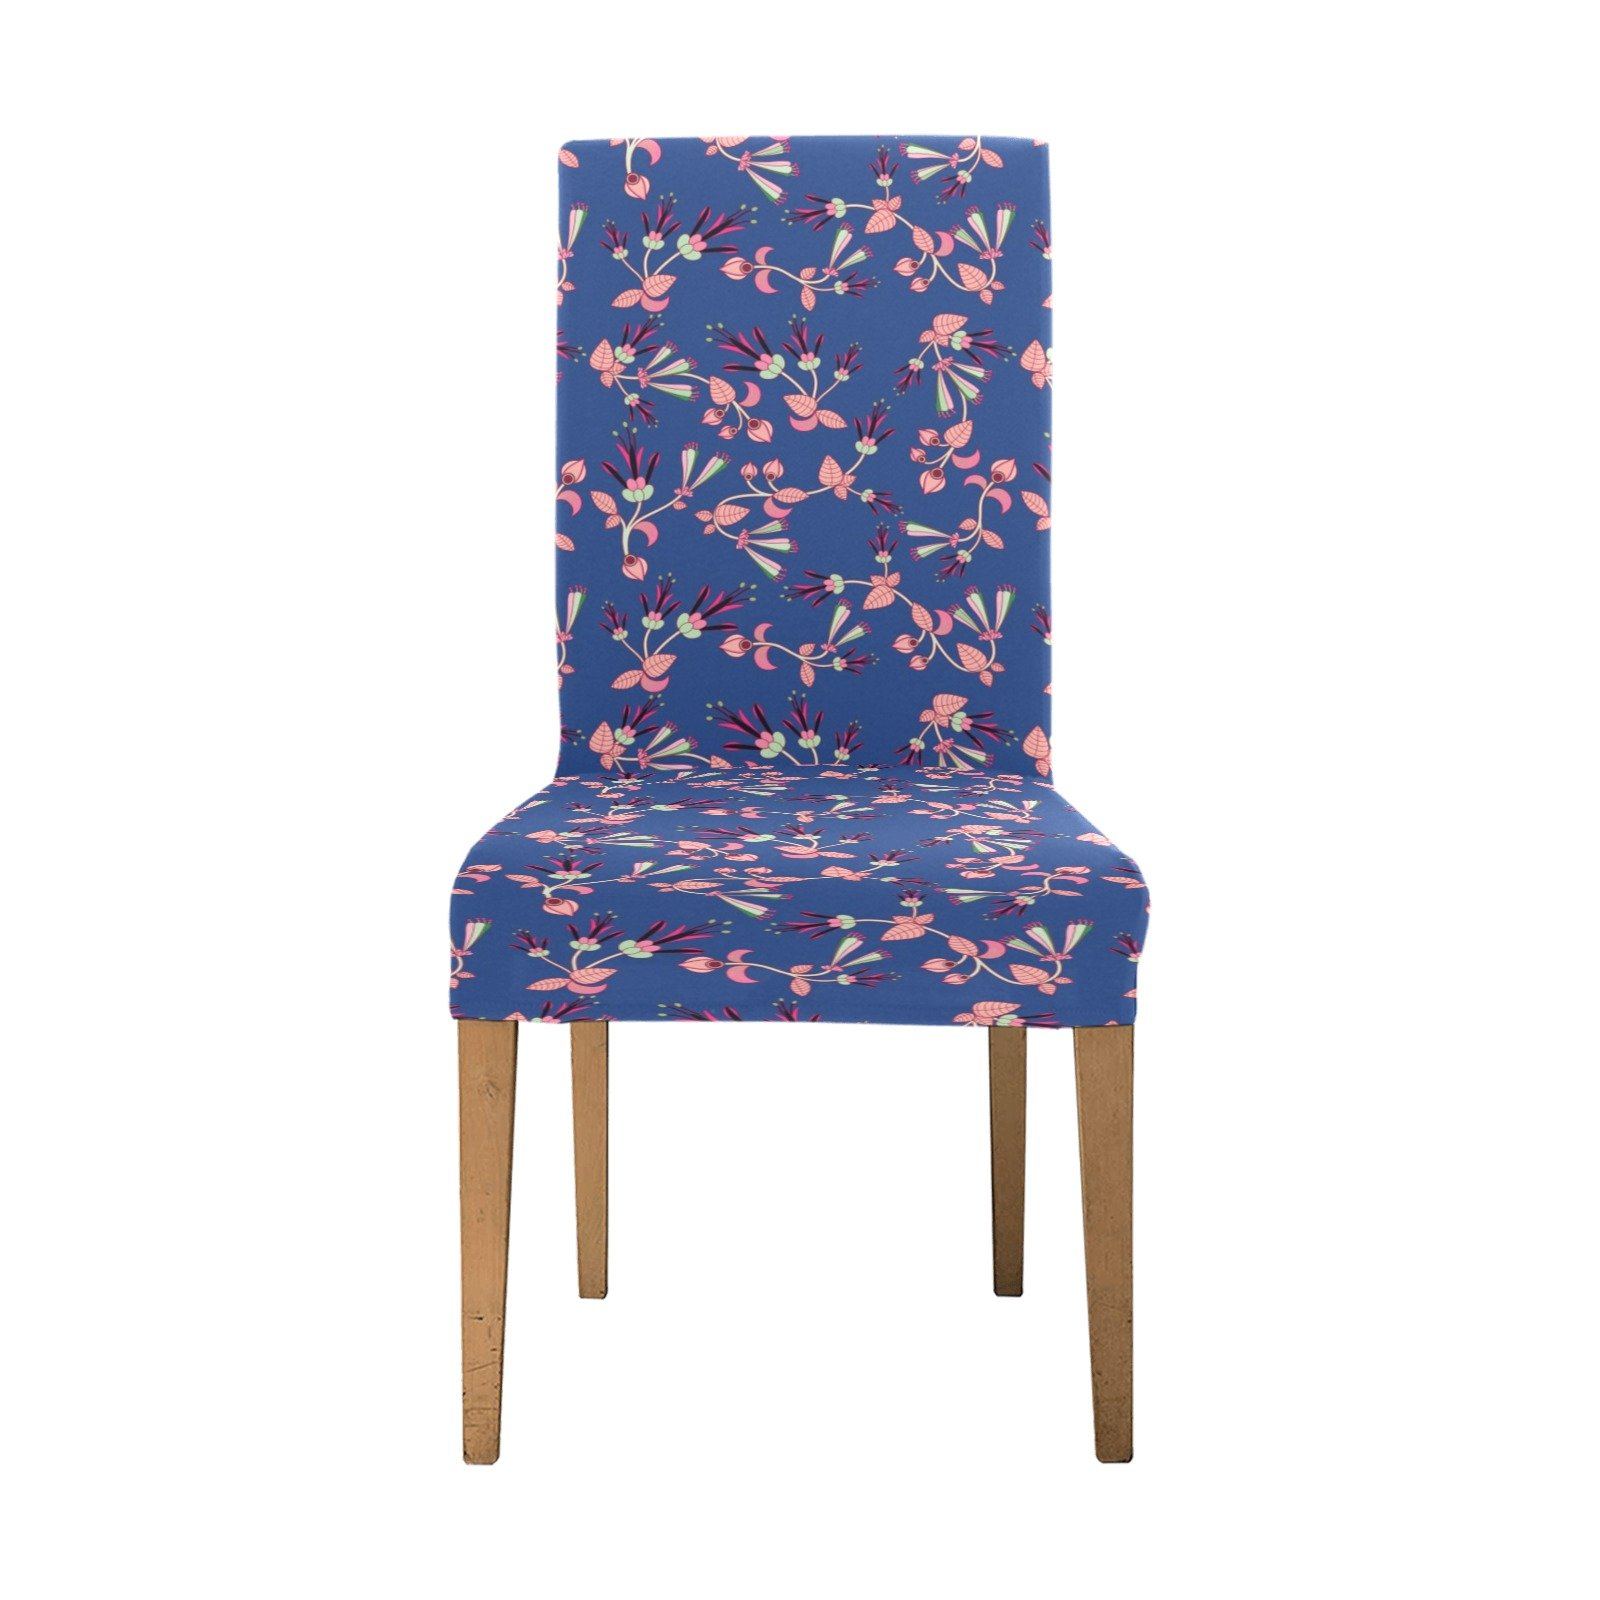 Swift Floral Peach Blue Chair Cover (Pack of 6) Chair Cover (Pack of 6) e-joyer 